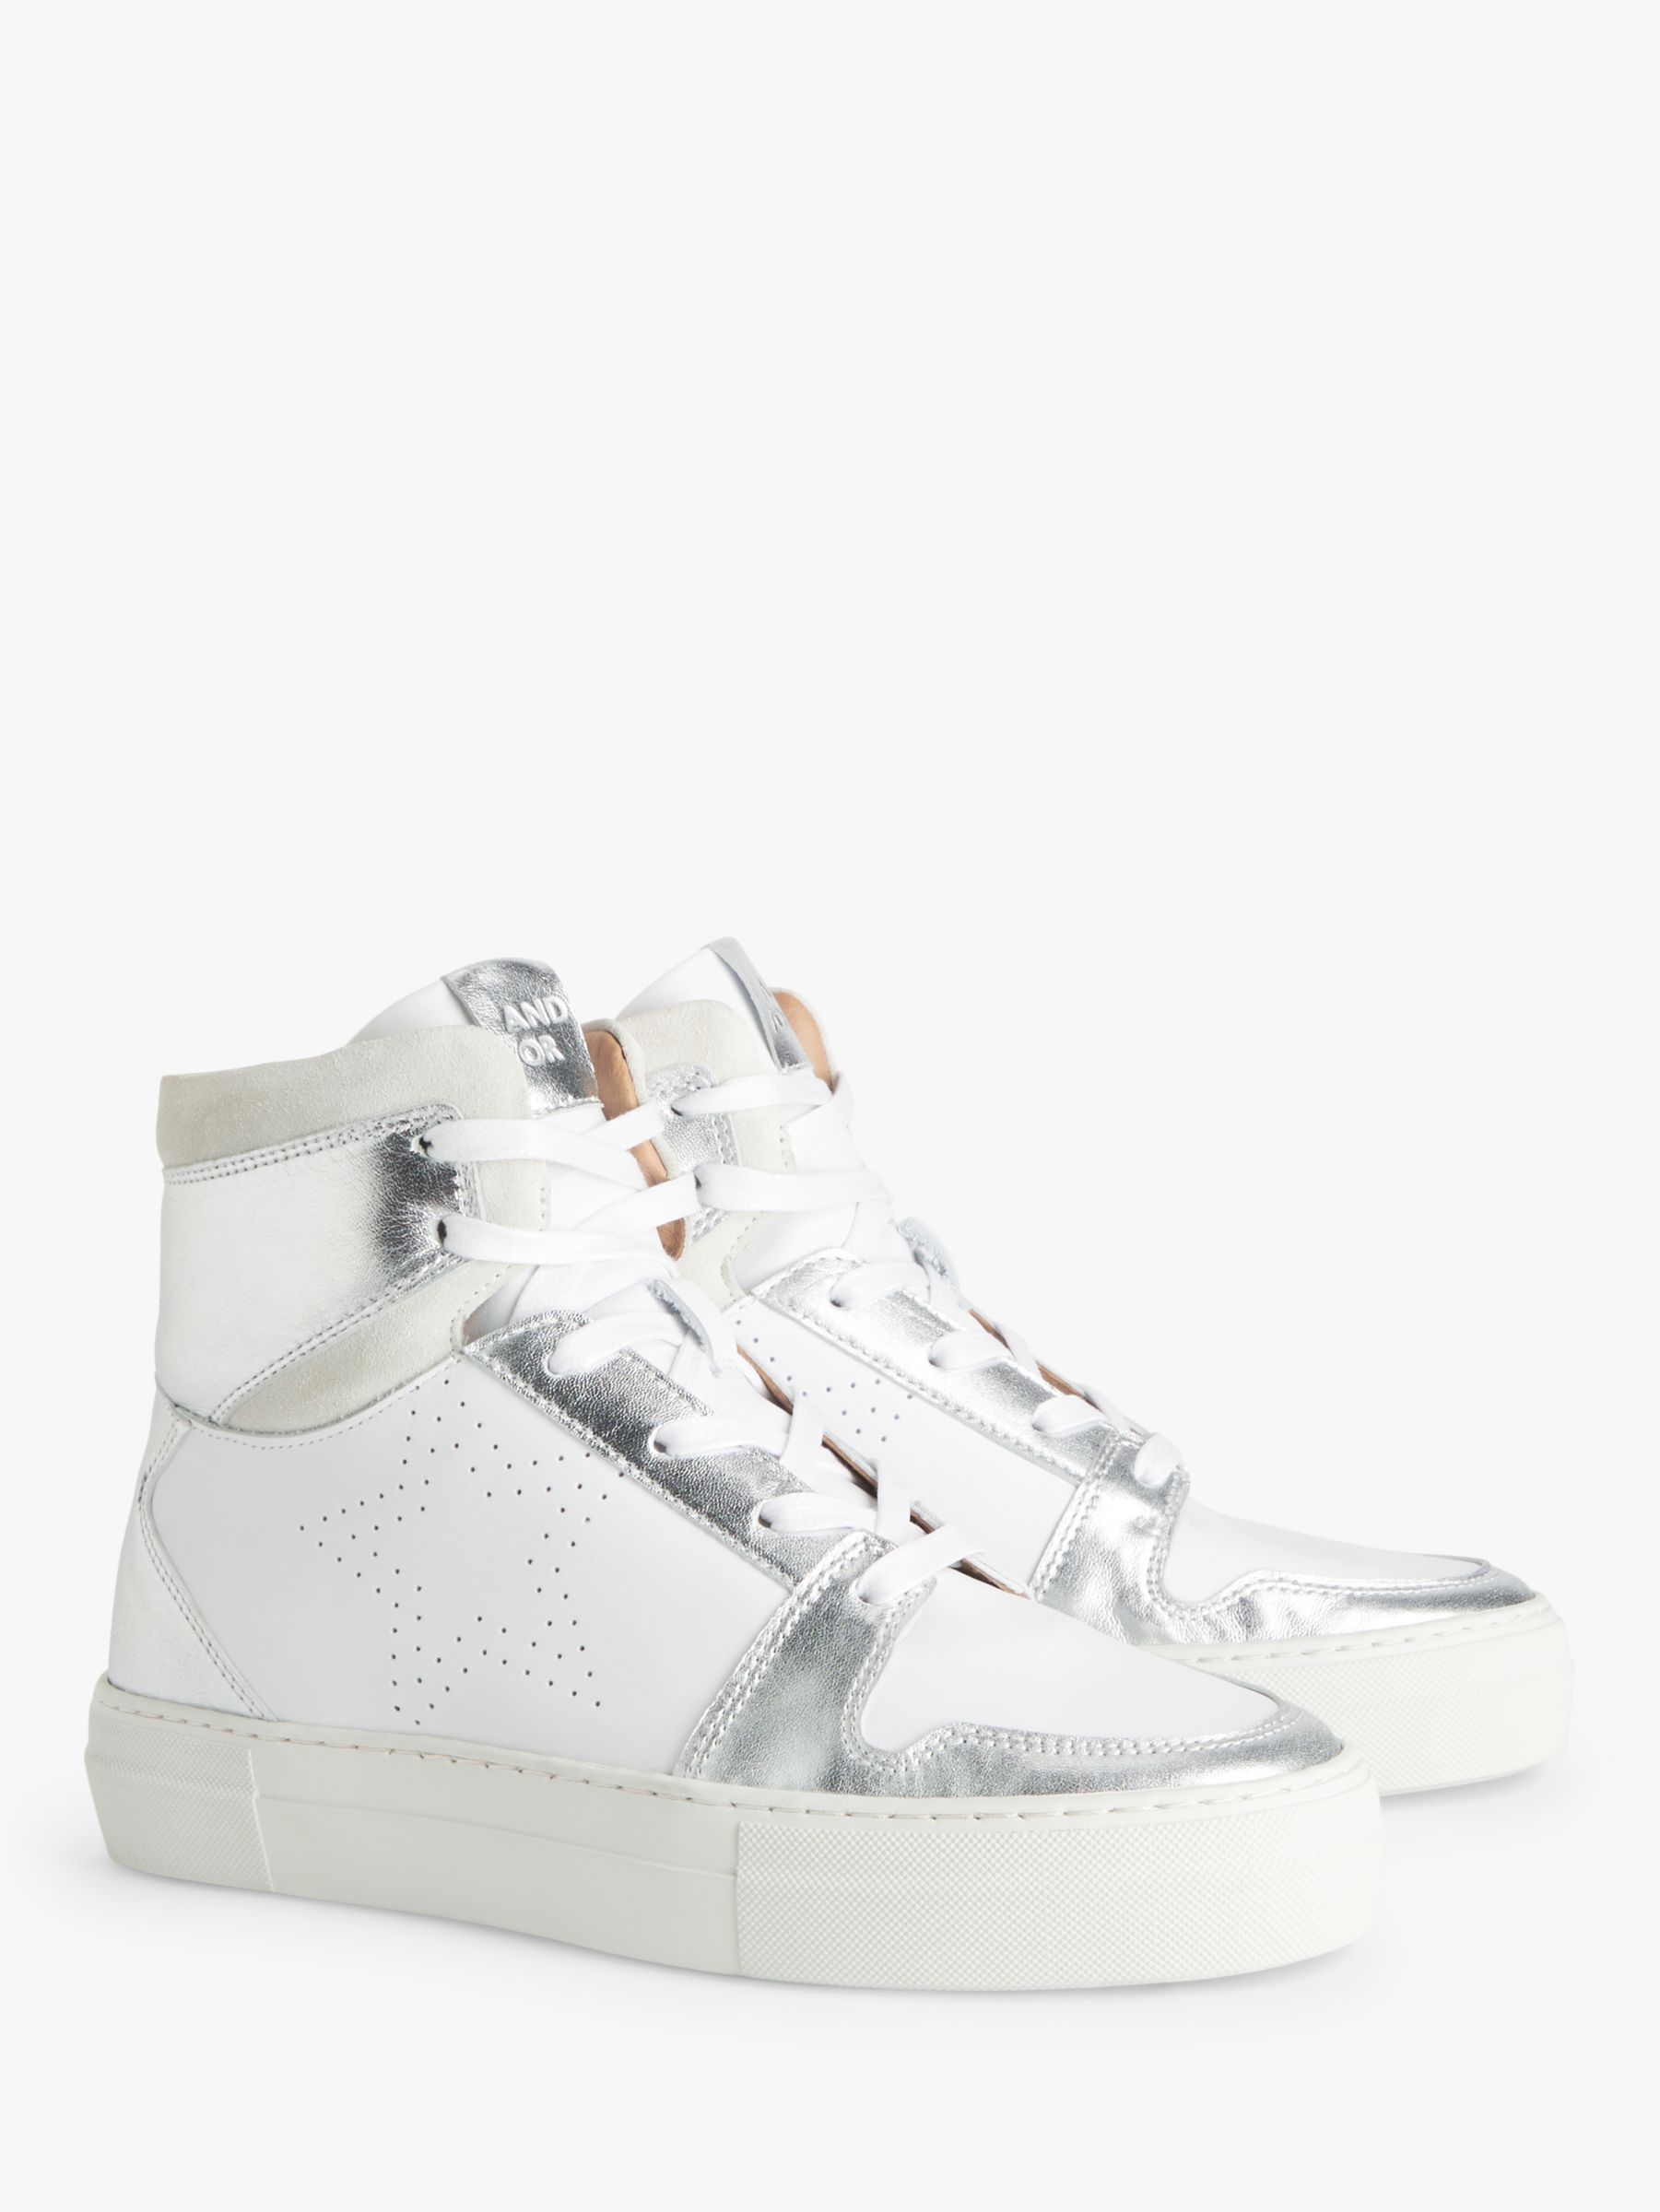 AND/OR Ezra Leather Hi-Top Star Motif Trainers, White/Silver at John ...